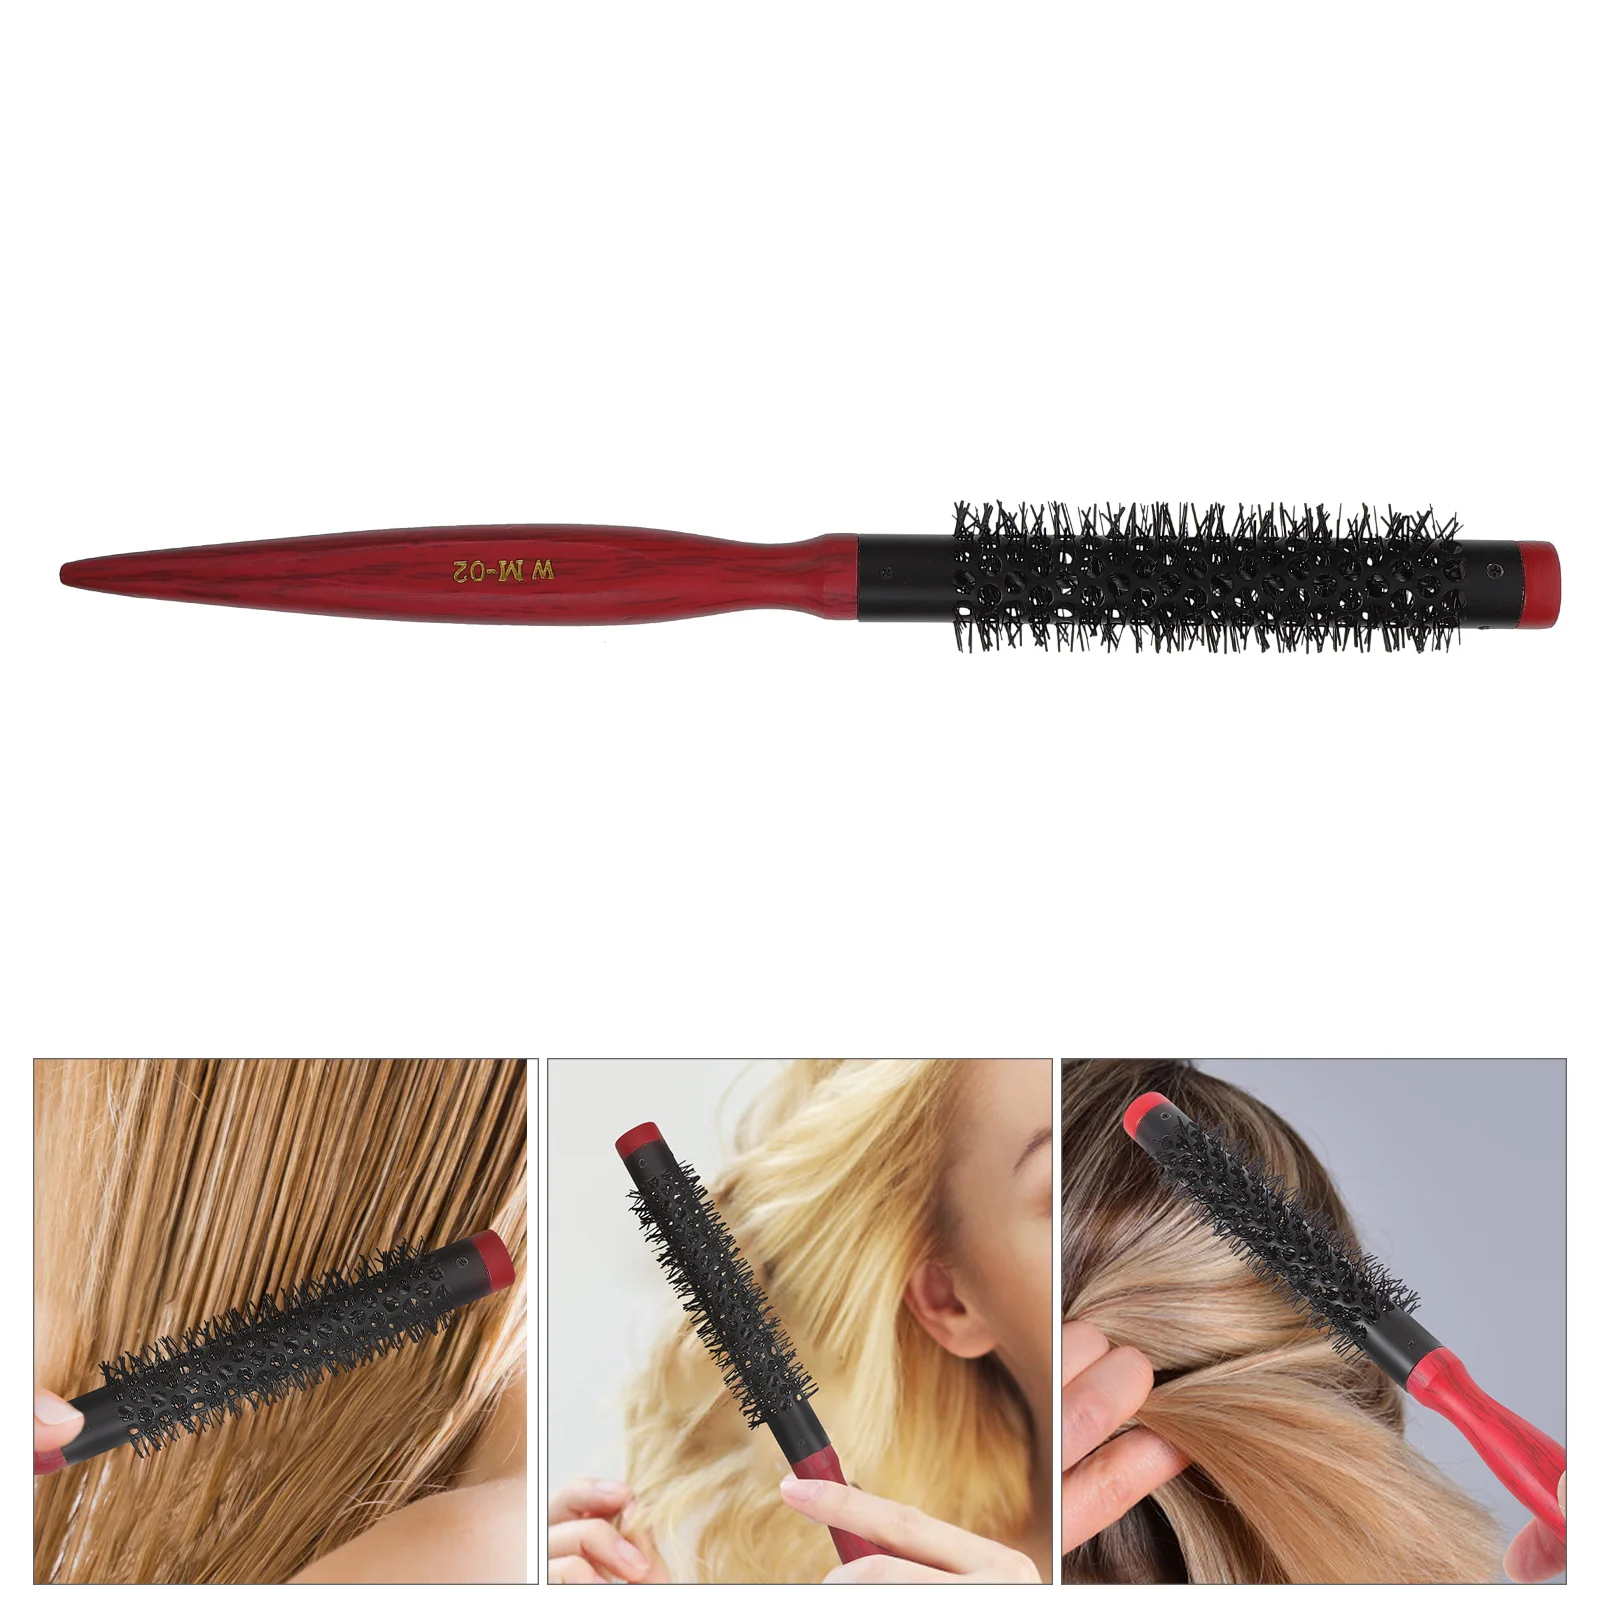 

Hair Brush Comb Curling Round Professional Paddle Styling Hairdressing Handle Wood Boar Nylon Roll Combs Hairstyle Scalp Short